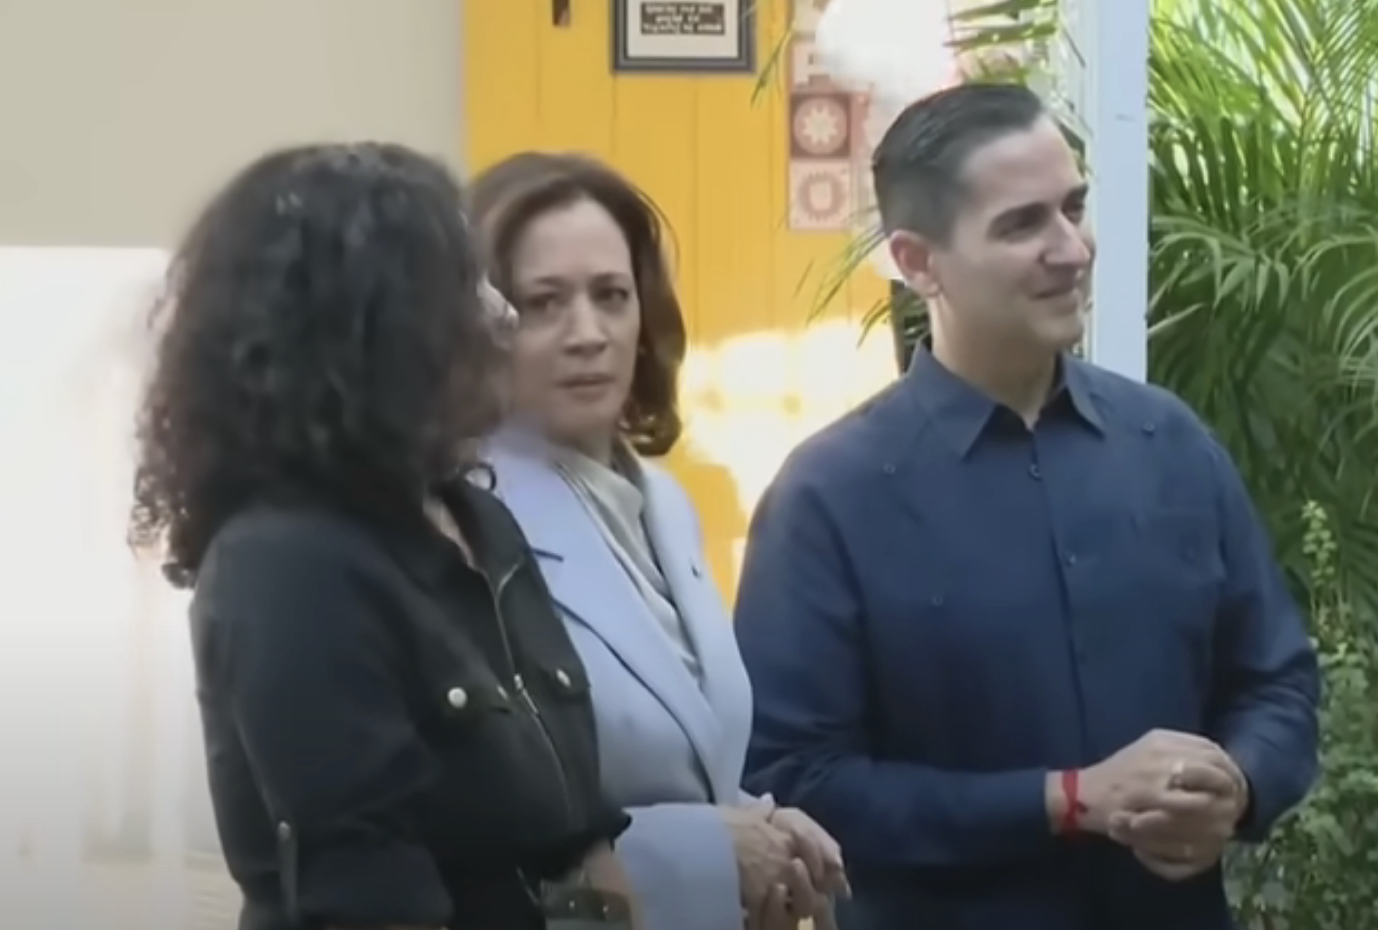 Kamala looking at the executive director, with her hands clasped